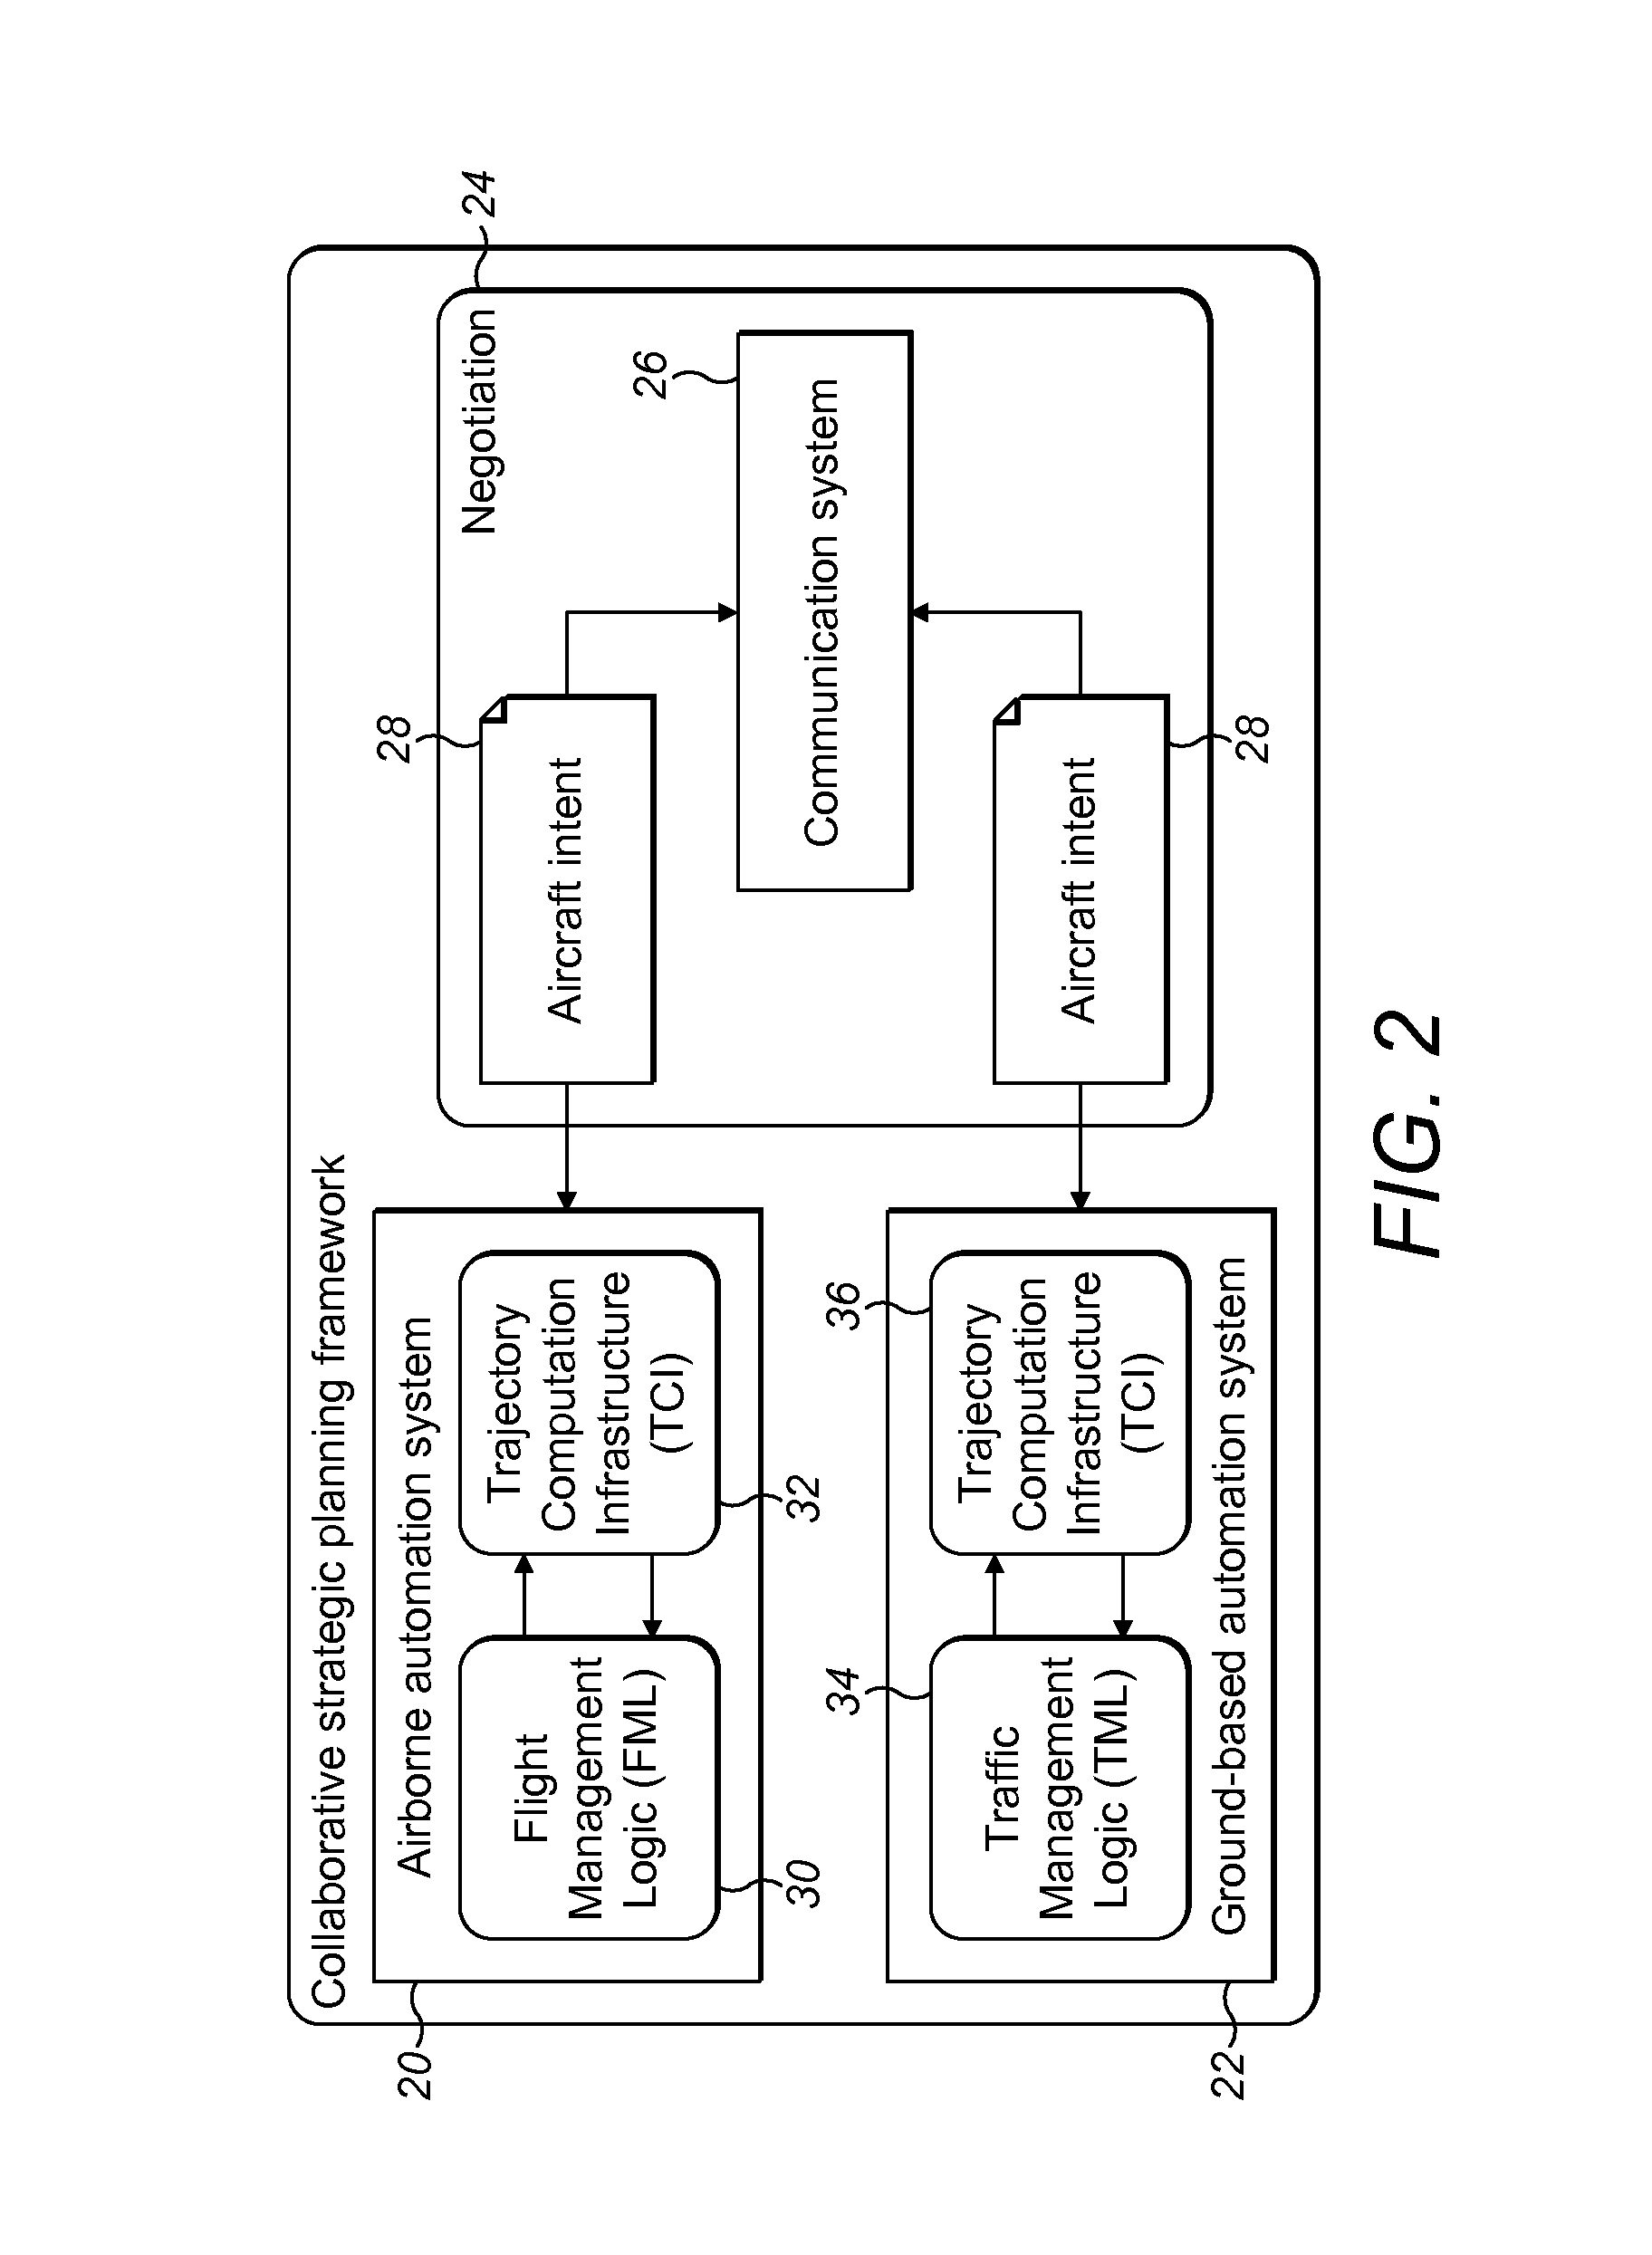 Conflict Detection and Resolution Using Predicted Aircraft Trajectories